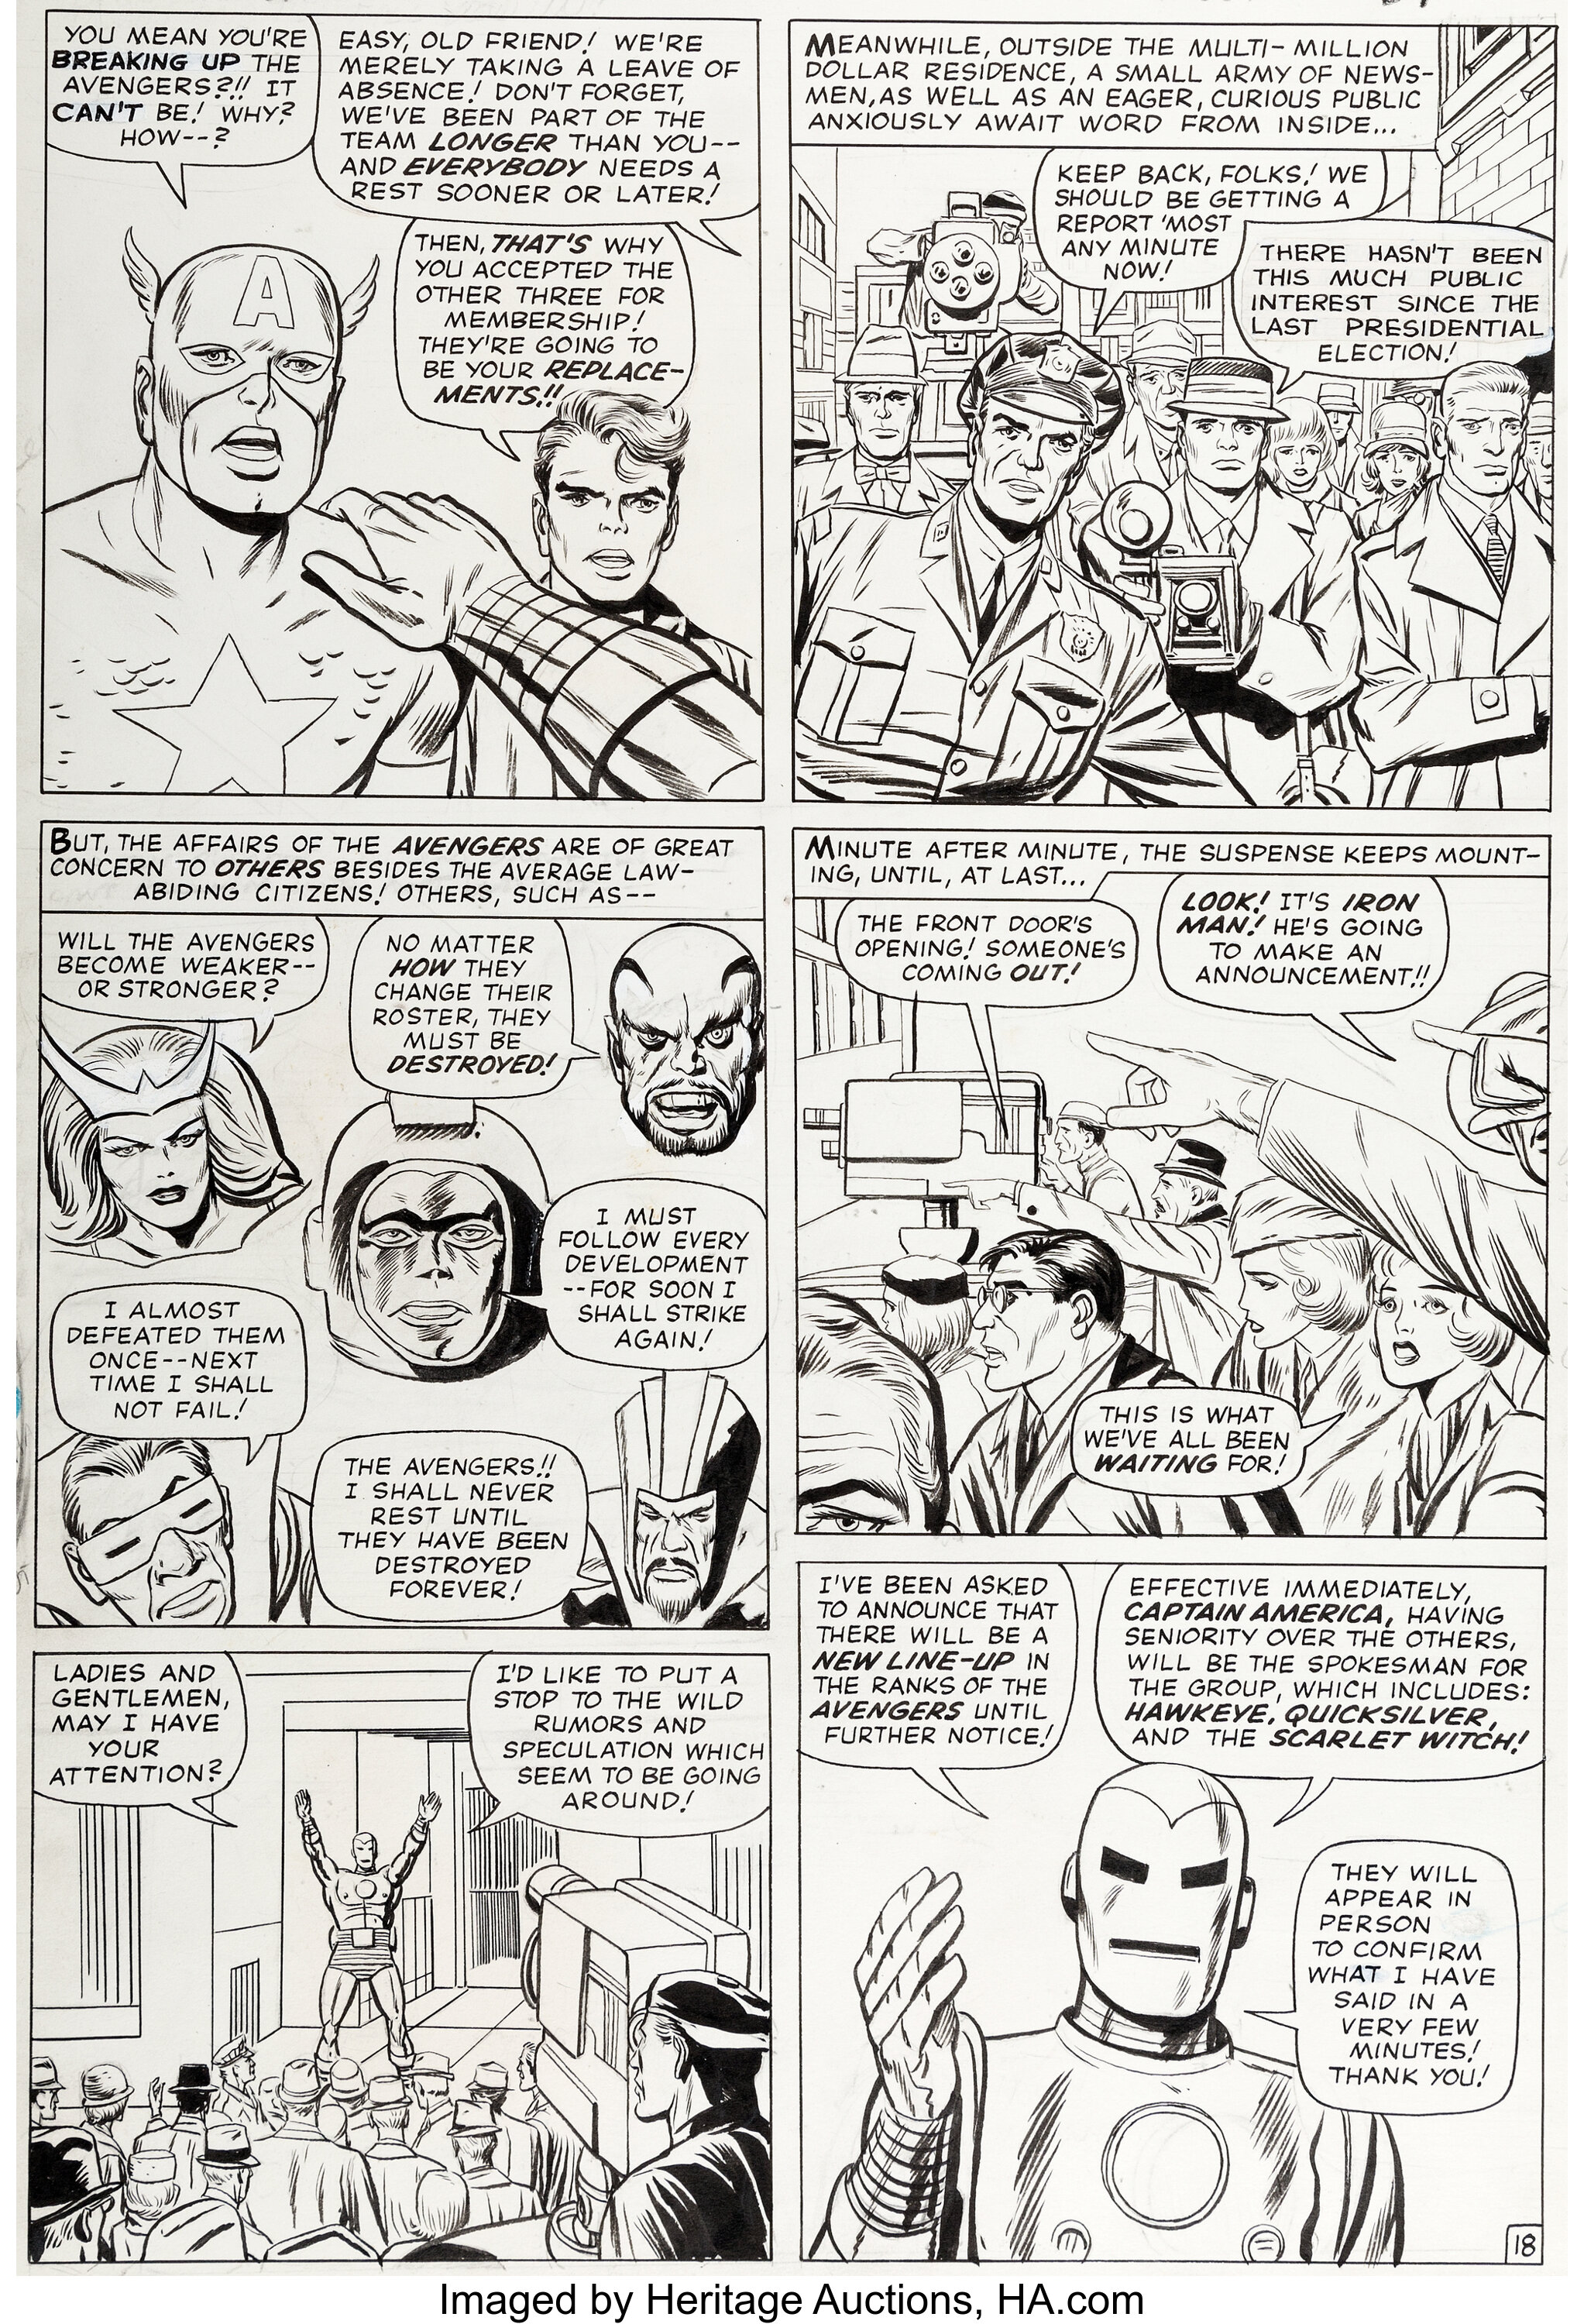 Jack Kirby and Dick Ayers Avengers #16 Page 18 Original Art | Lot #93135 |  Heritage Auctions